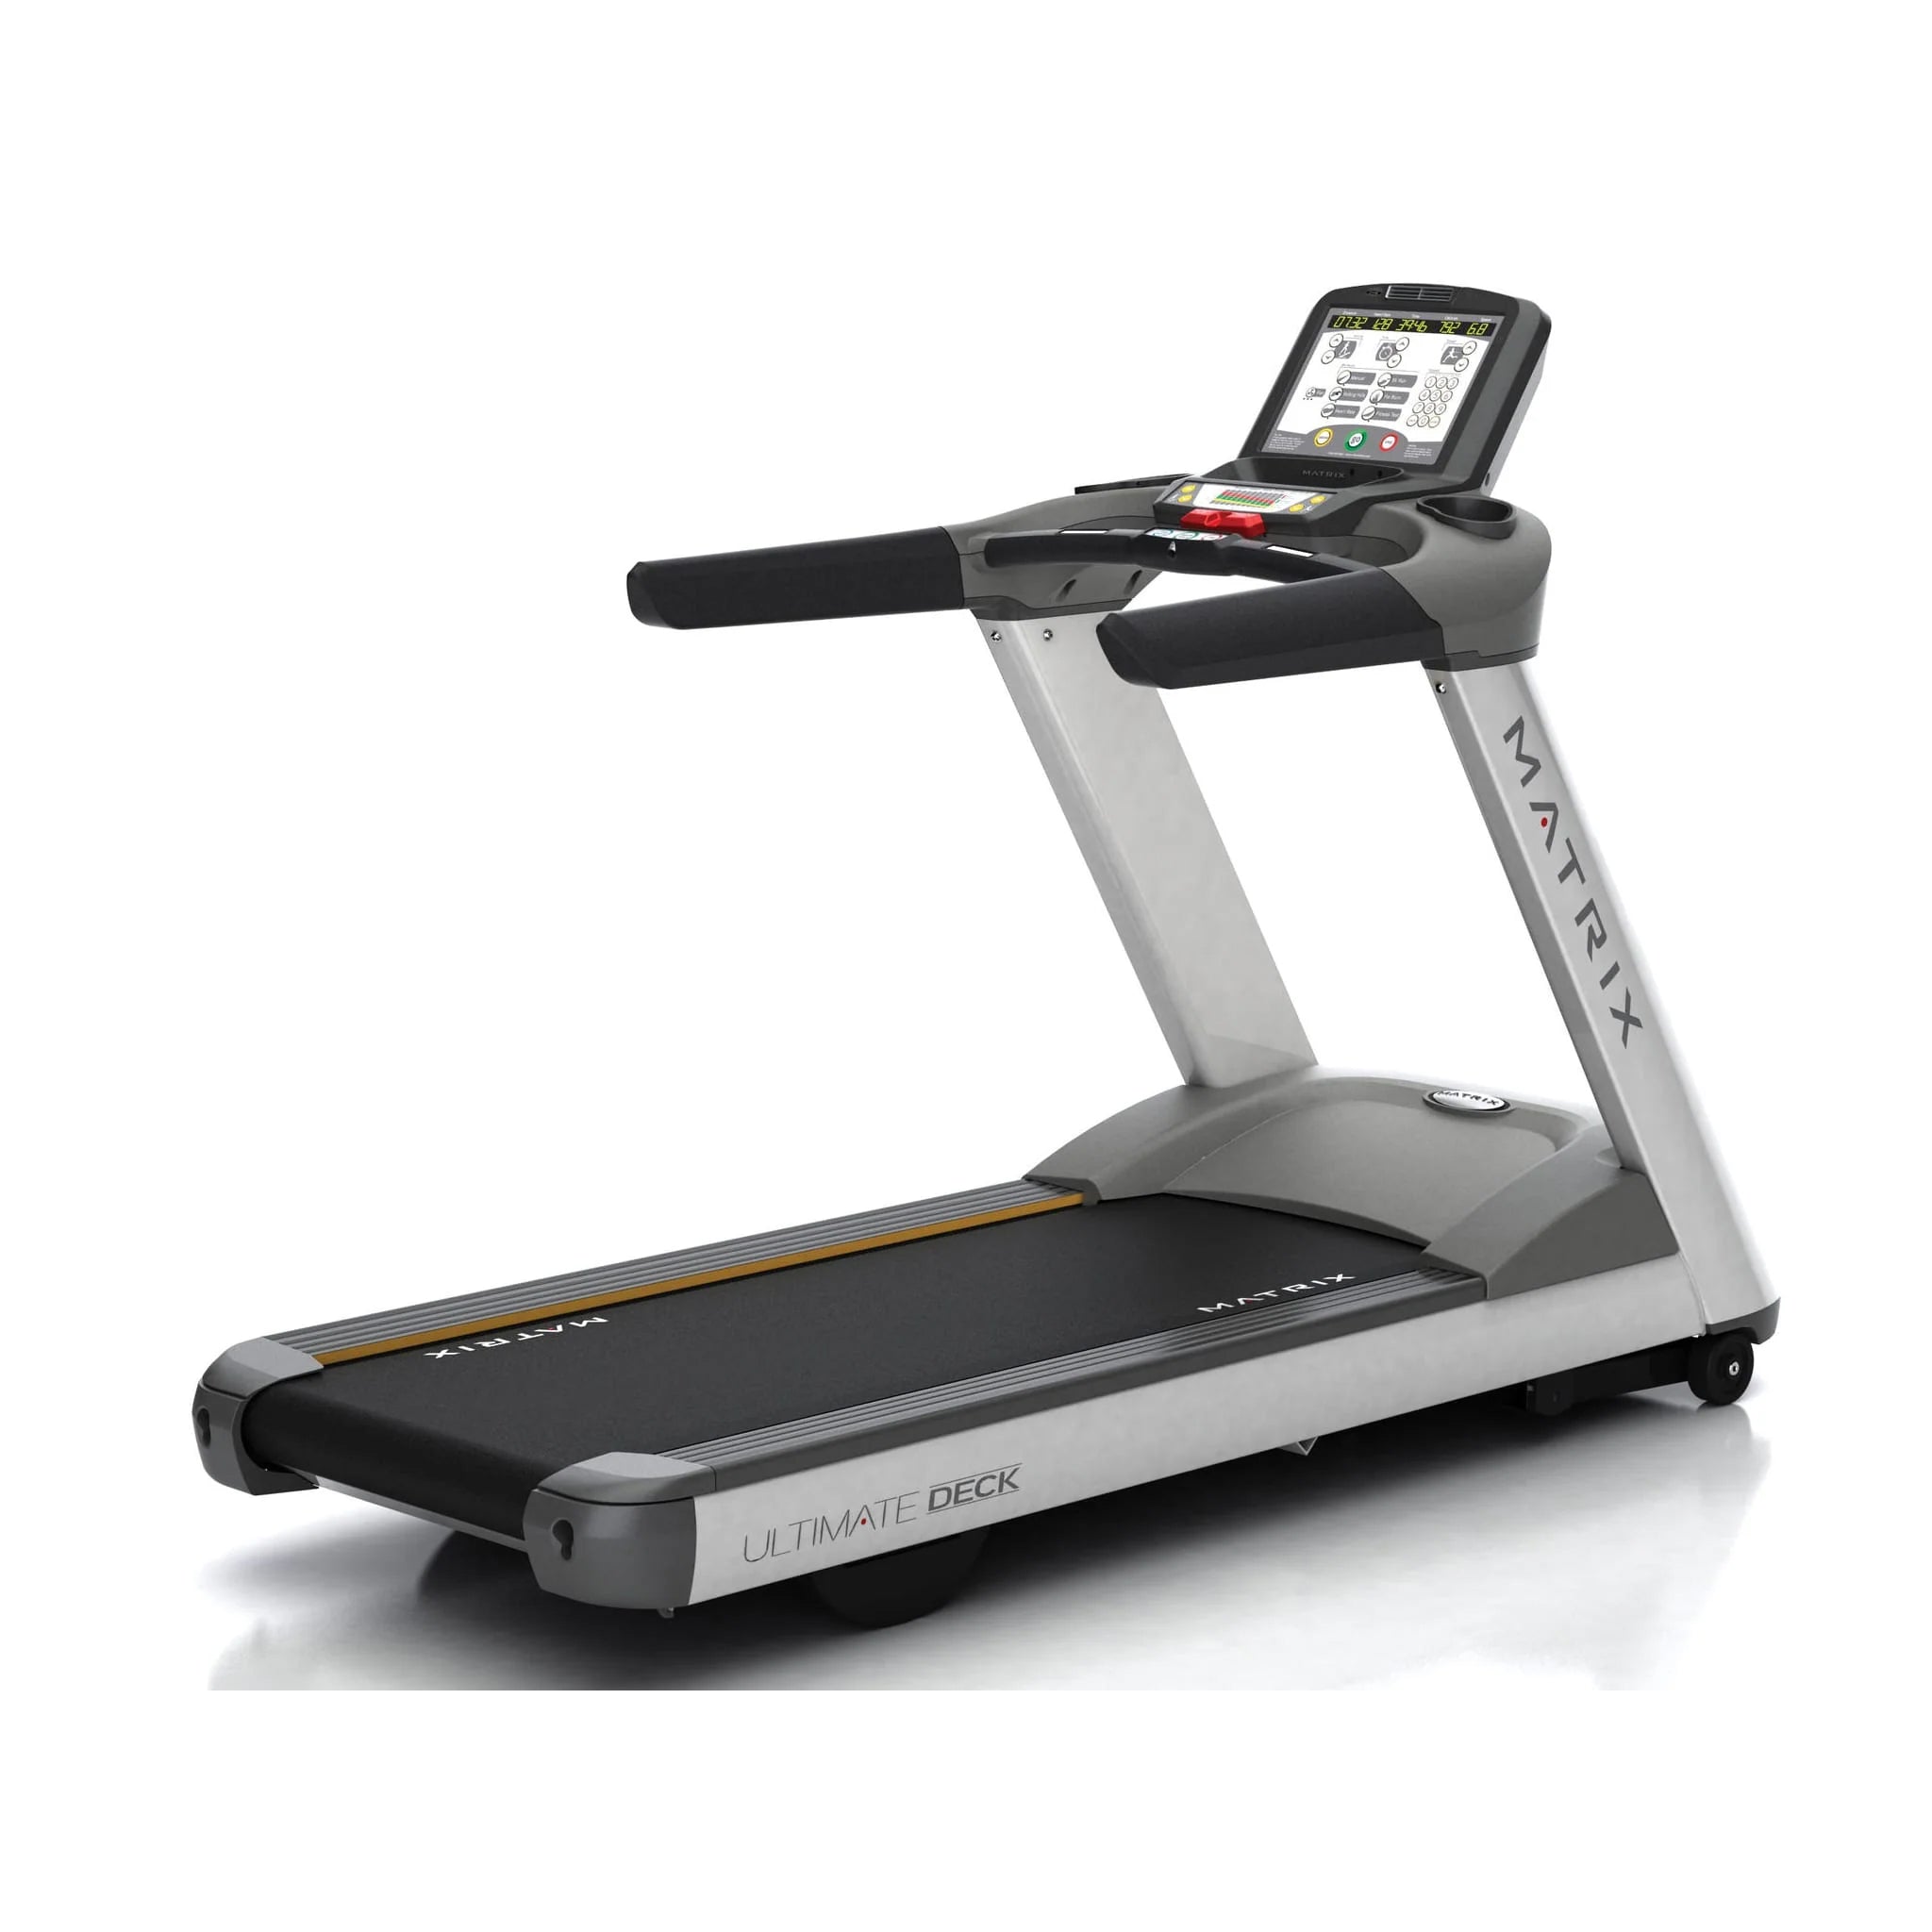 Righthand view of the Matrix T5x Treadmill